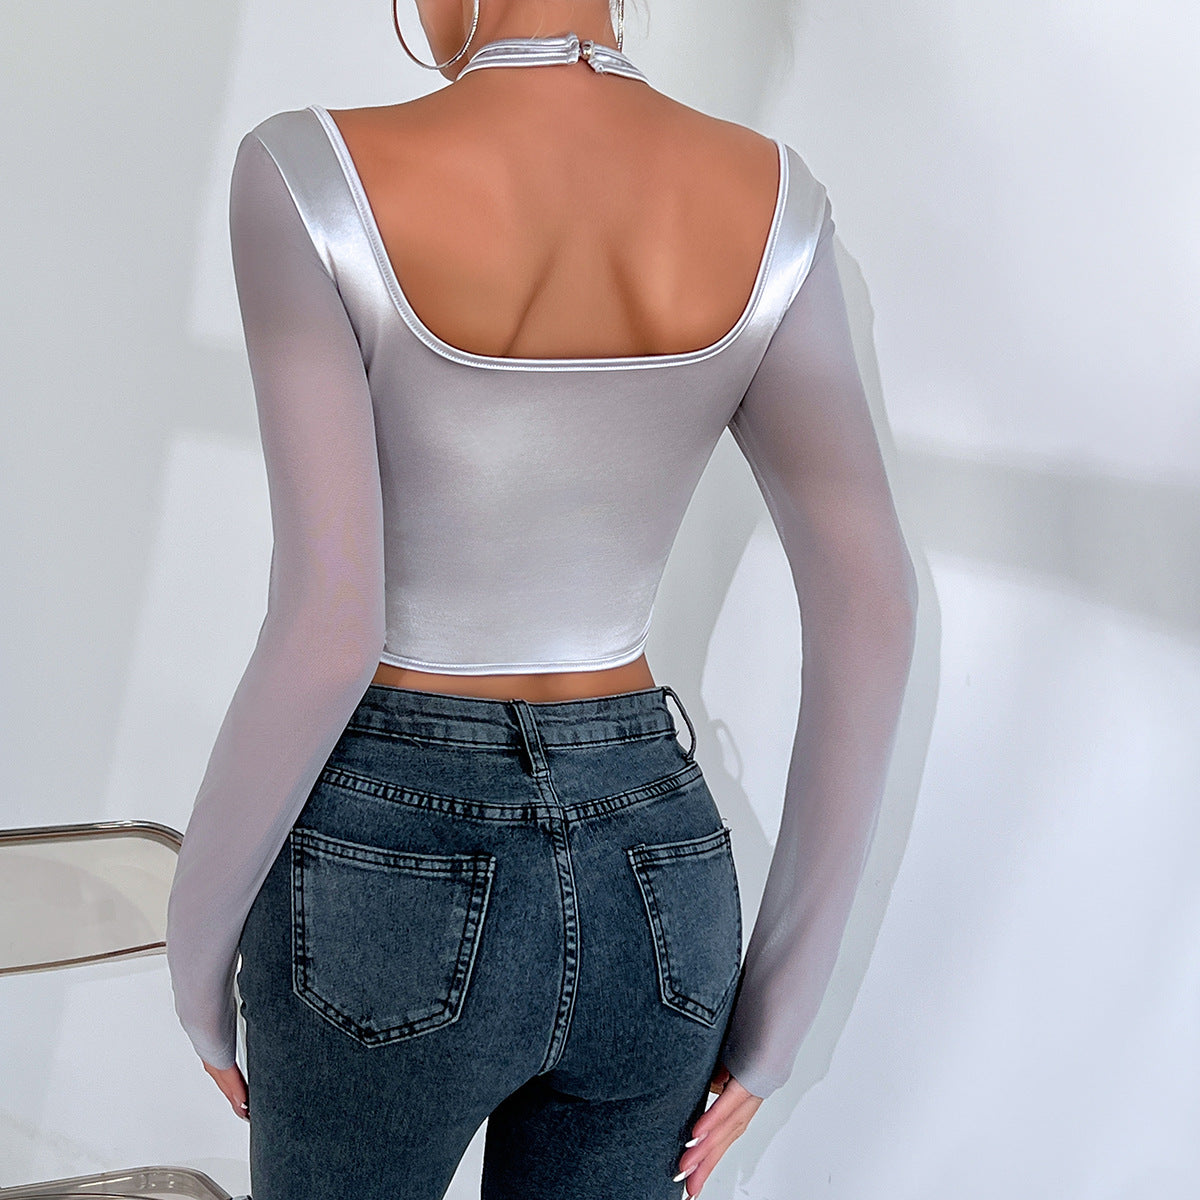 A person wearing a Maramalive™ Hot Girl Low-cut Sexy See-through Mesh Patchwork Halter Top Female and jeans stands facing away from the camera, capturing an essence of street fashion.